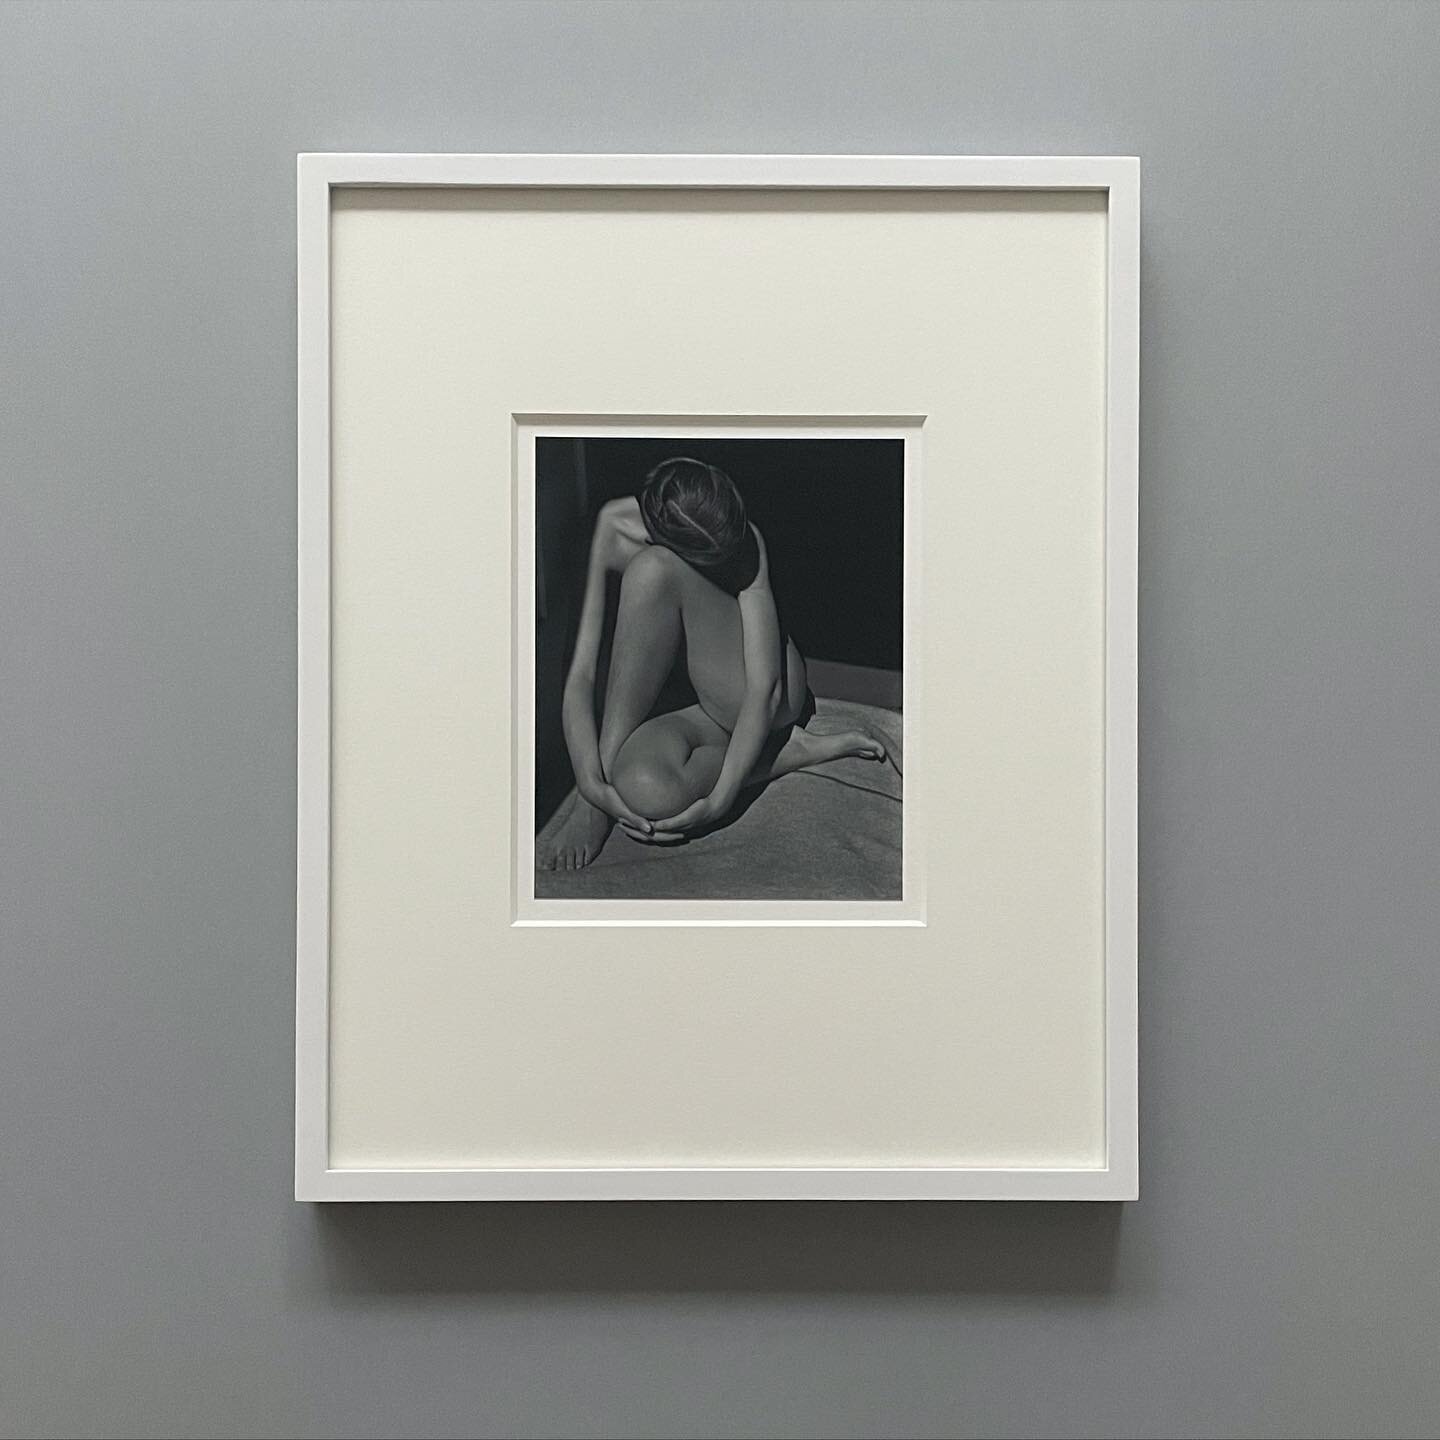 Lovely photograph by #edwardweston from 1931

Framed in a white sprayed tulip frame and glazed with #optium @truvuefineart for @ceascott